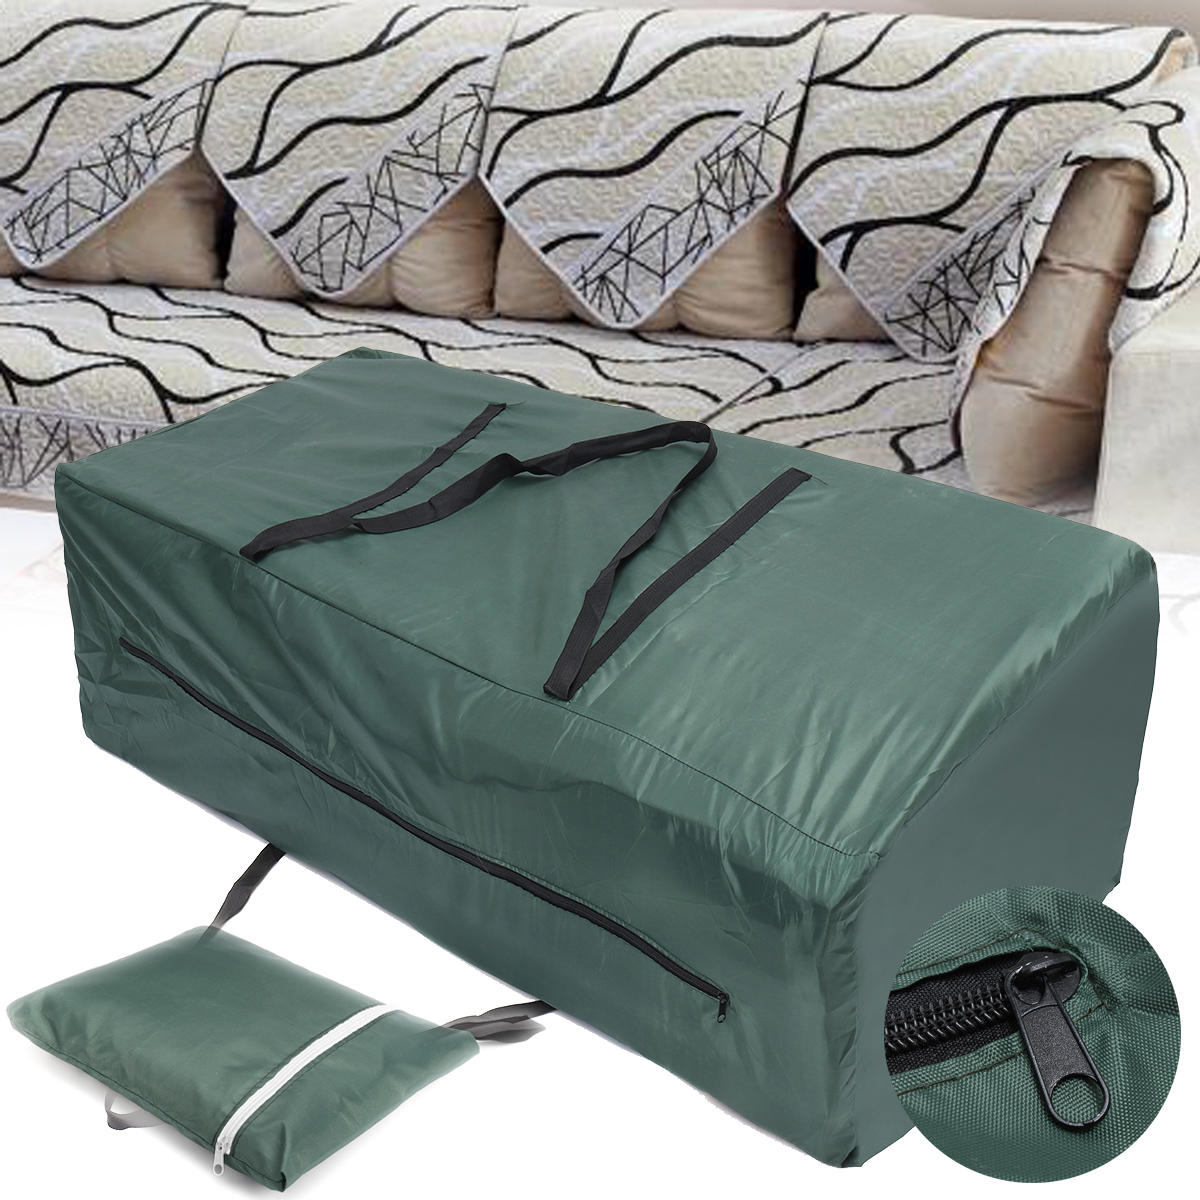 Outdoor Heavy Duty Garden Furniture Waterproof Cover Cushion Storage Bag Carry Pouch